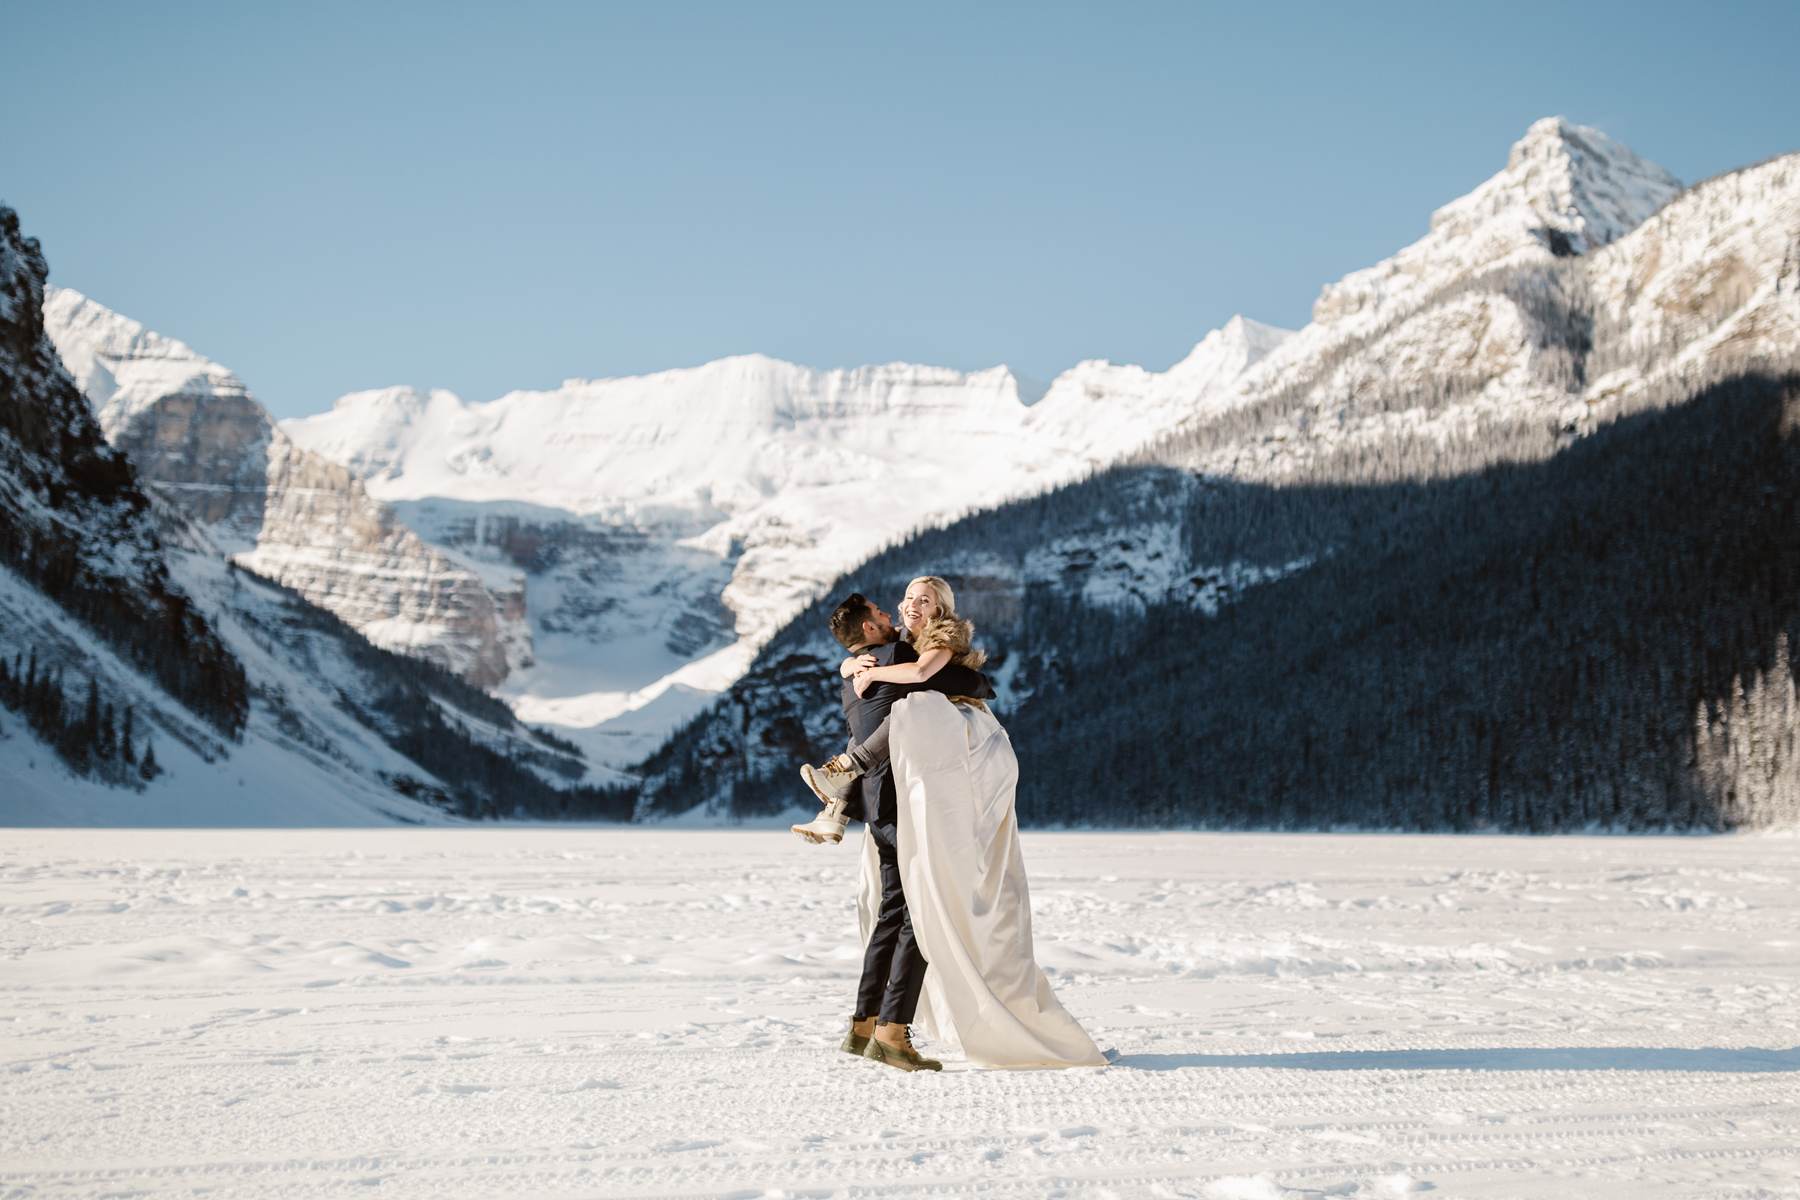 Fairmont Chateau Lake Louise Wedding Photography in Winter - Image 22